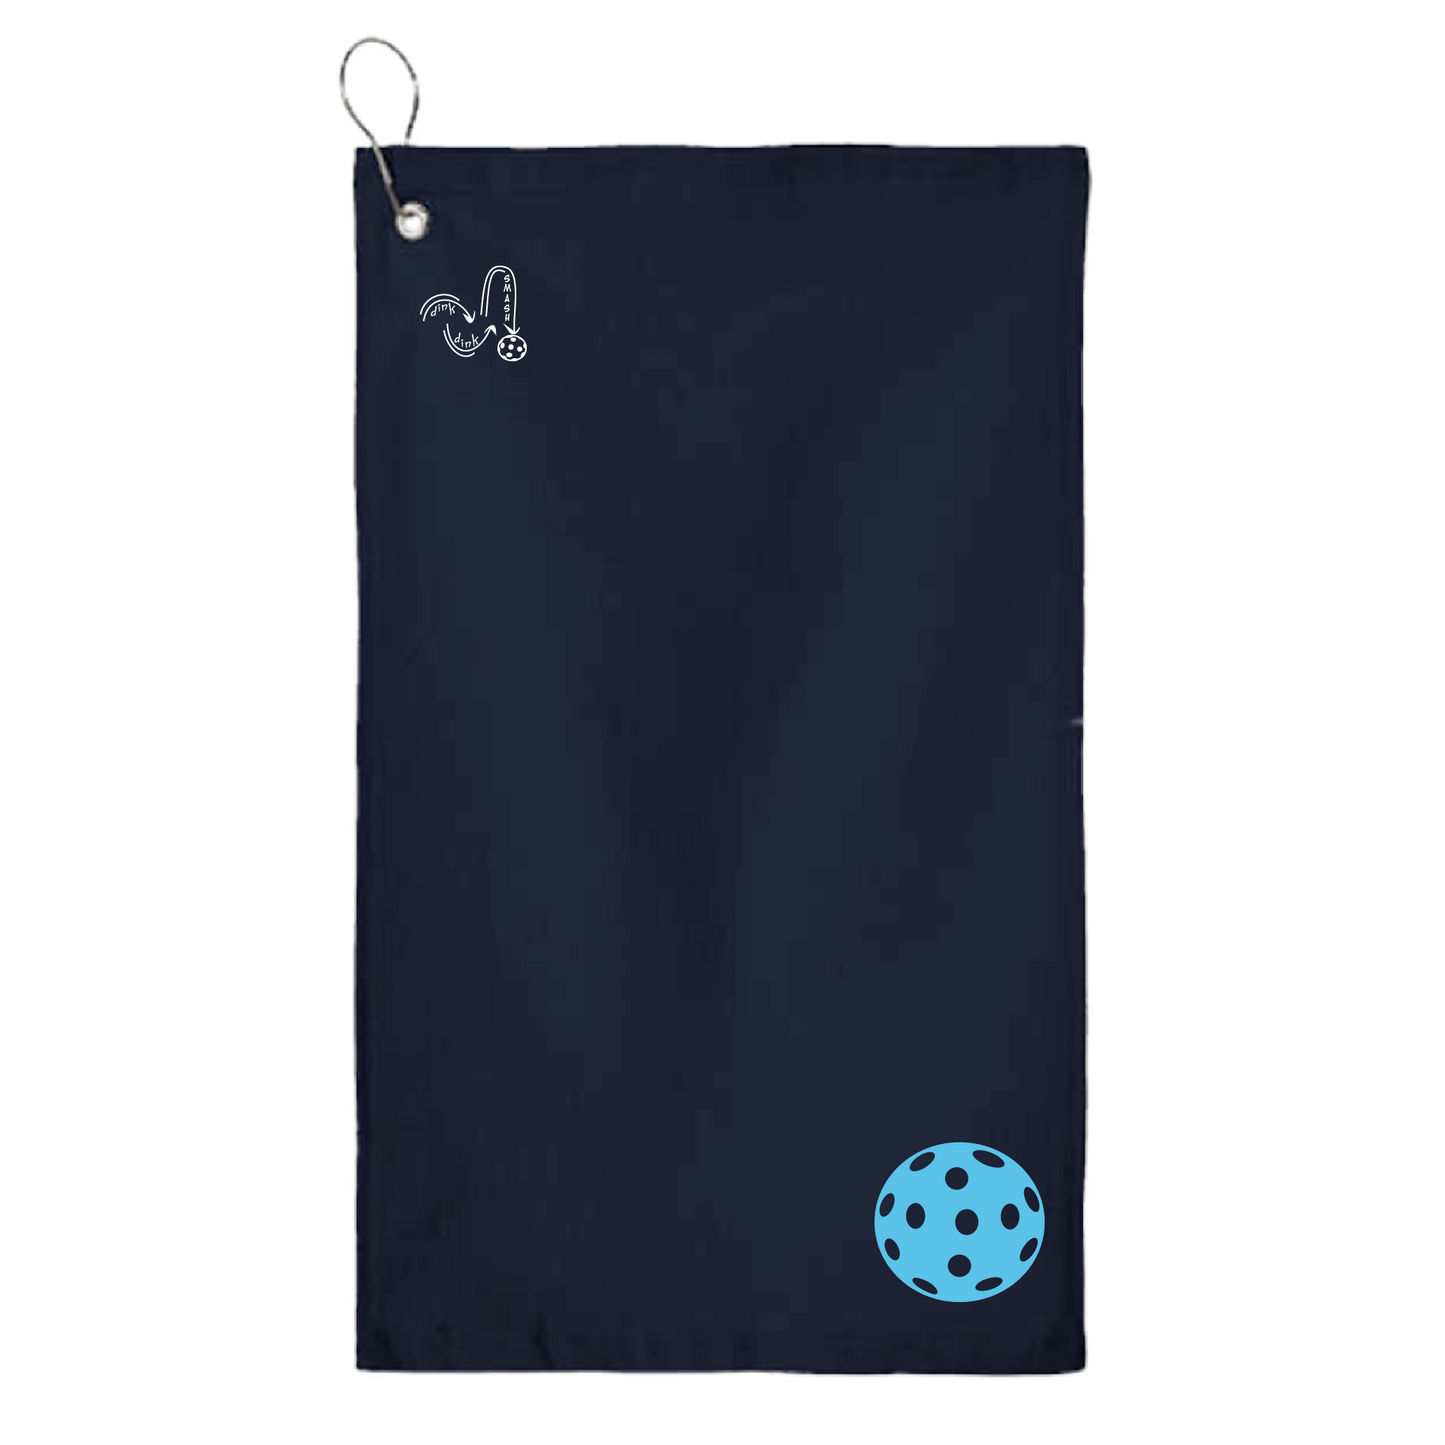 This pickleball towel is crafted with cotton terry velour for optimal performance. It features grommets, hooks, and hemmed edges for added durability. It's perfect for completing your pickleball gear, and an ideal gift for friends and tournaments. The towel is designed to be both absorbent and lightweight, so you can remain dry and comfortable while you play.